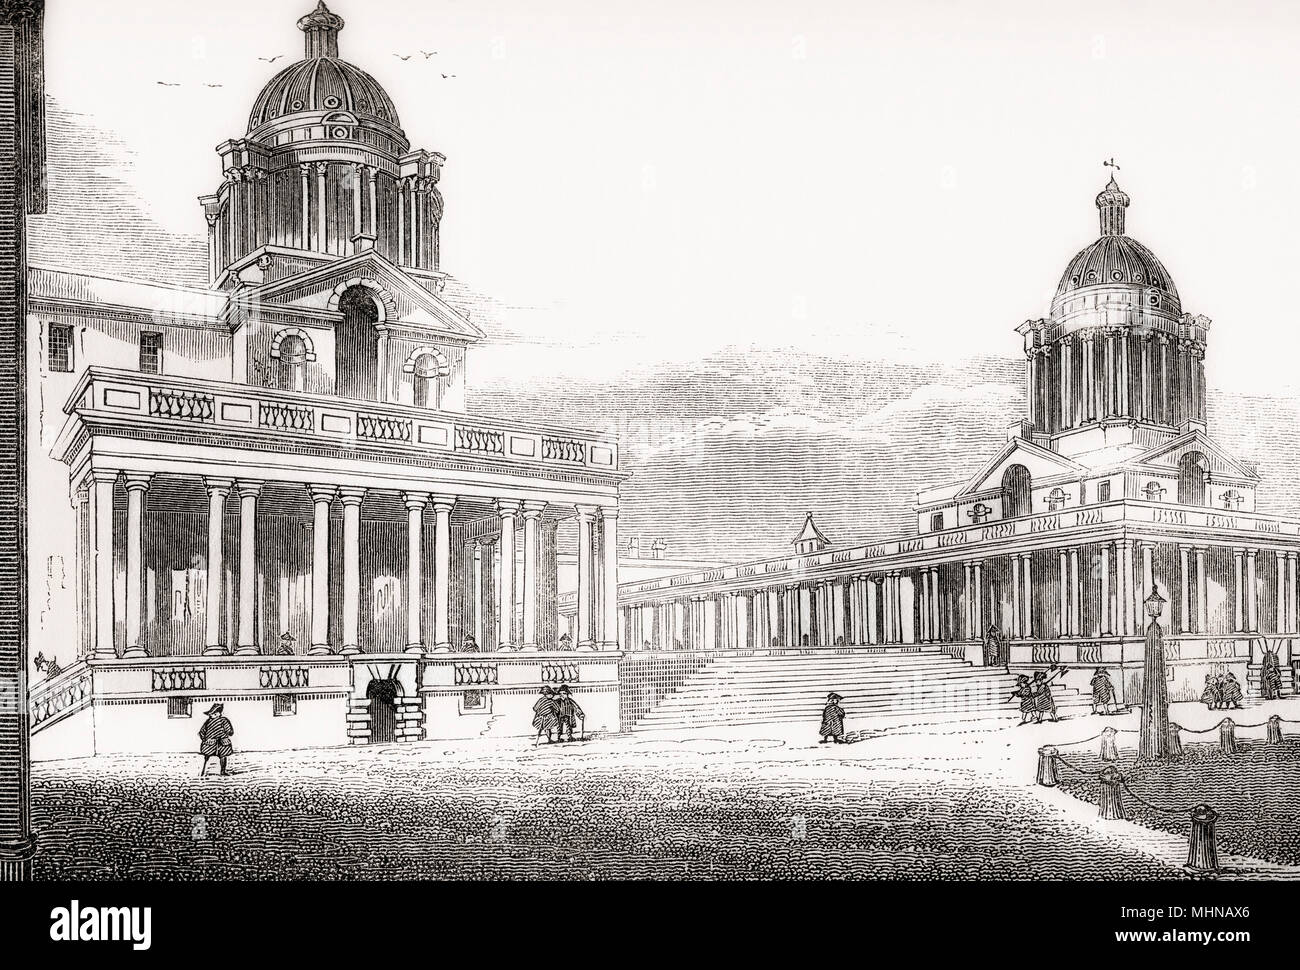 Greenwich Hospital, Greenwich, London, England, seen here in the mid 19th century when it  was a permanent home for retired sailors of the Royal Navy.  From Old England: A Pictorial Museum, published 1847. Stock Photo